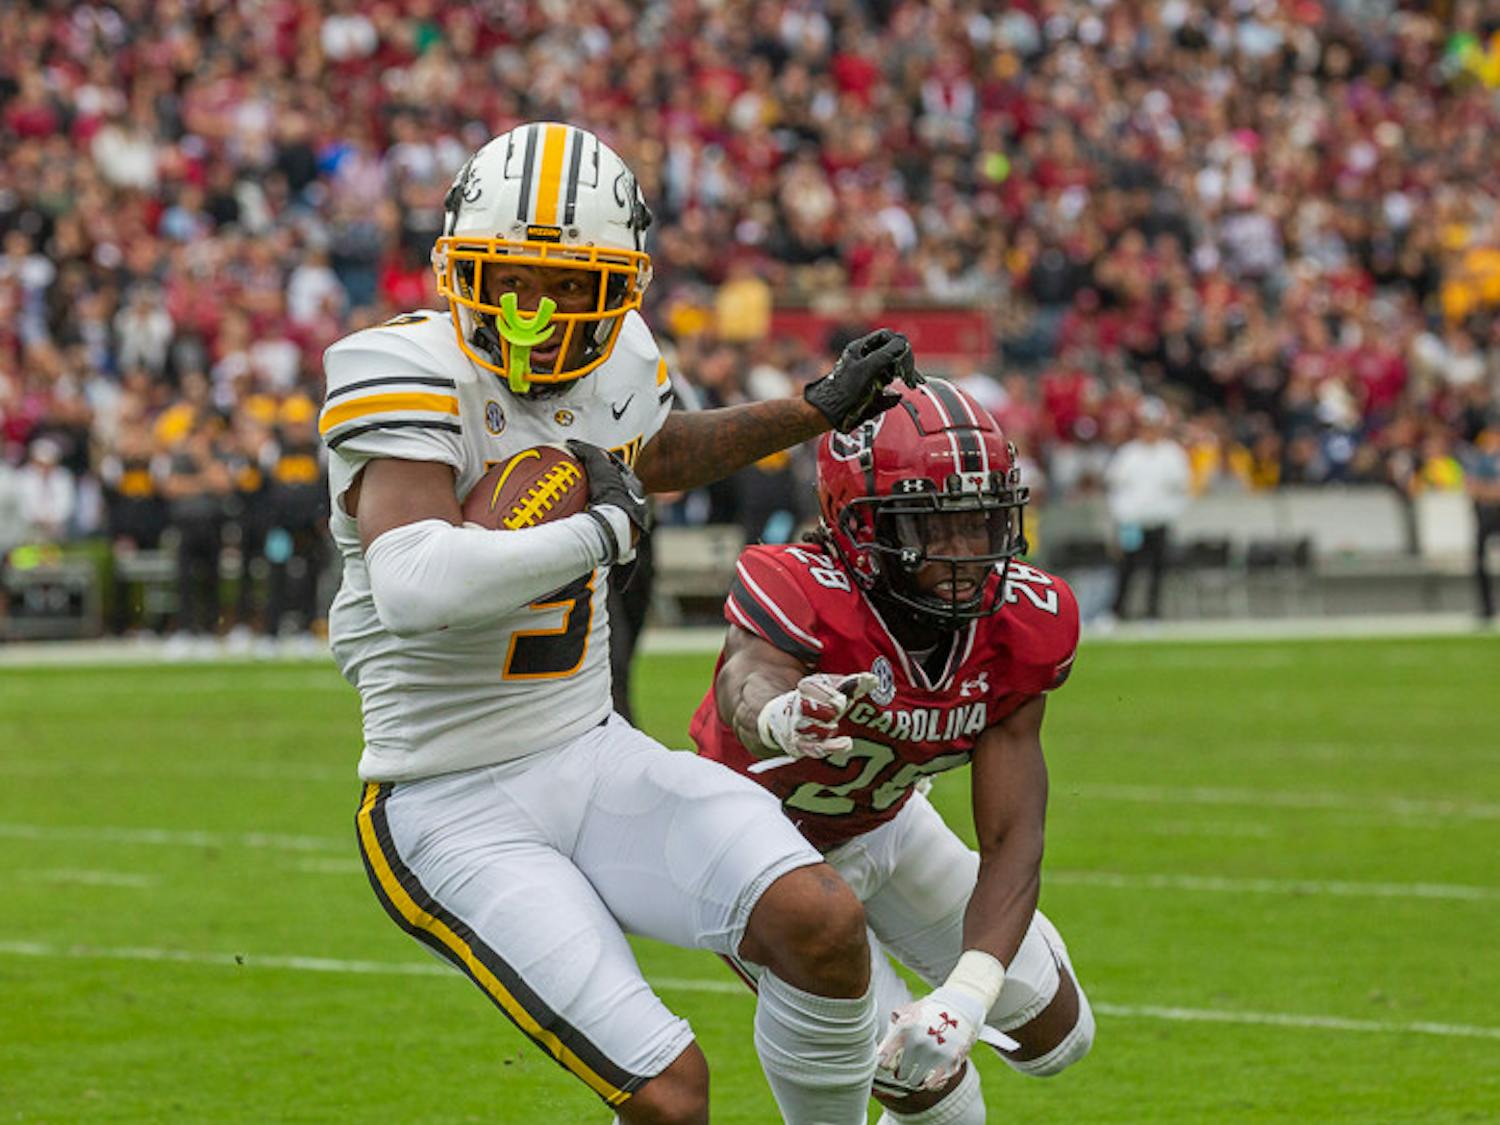 Redshirt senior defensive Back Darius Rush attempts to pick the ball from Missouri's running back during the South Carolina vs. Missouri Game on Oct. 29, 2022. The Tigers beat the Gamecocks 23-10.